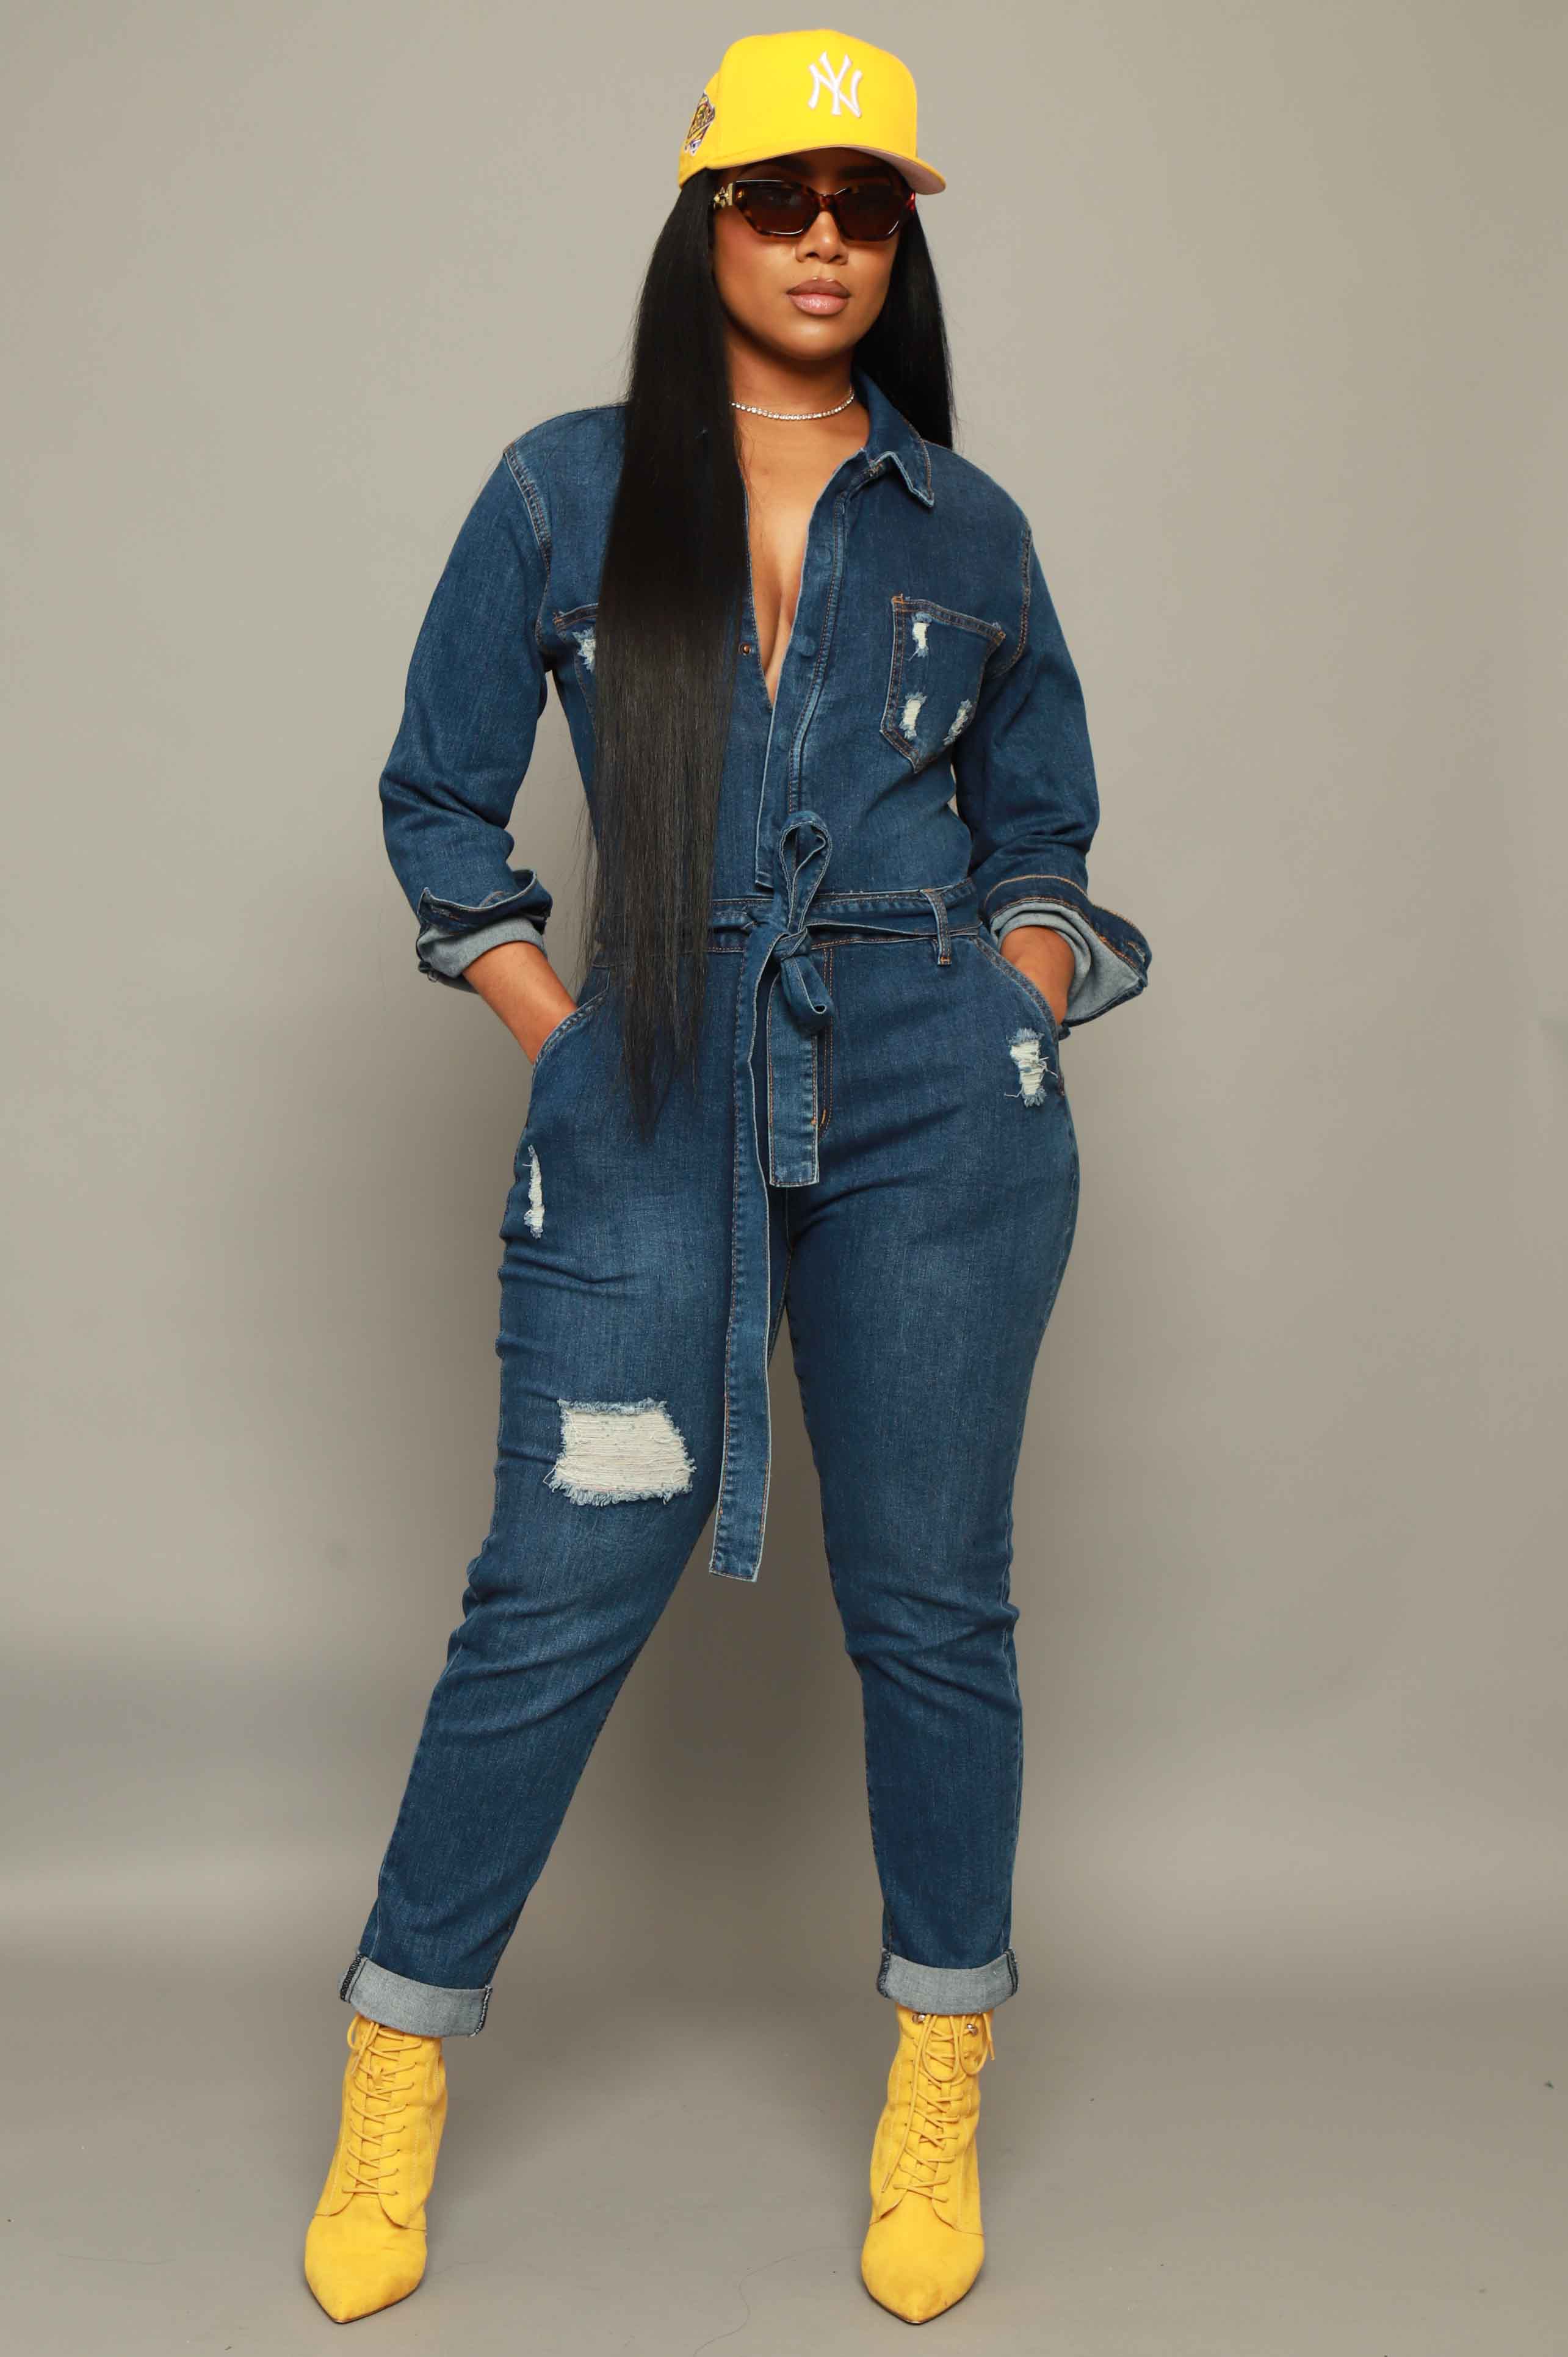 Over and Over Distressed Denim Jumpsuit - Medium Wash - Swank A Posh